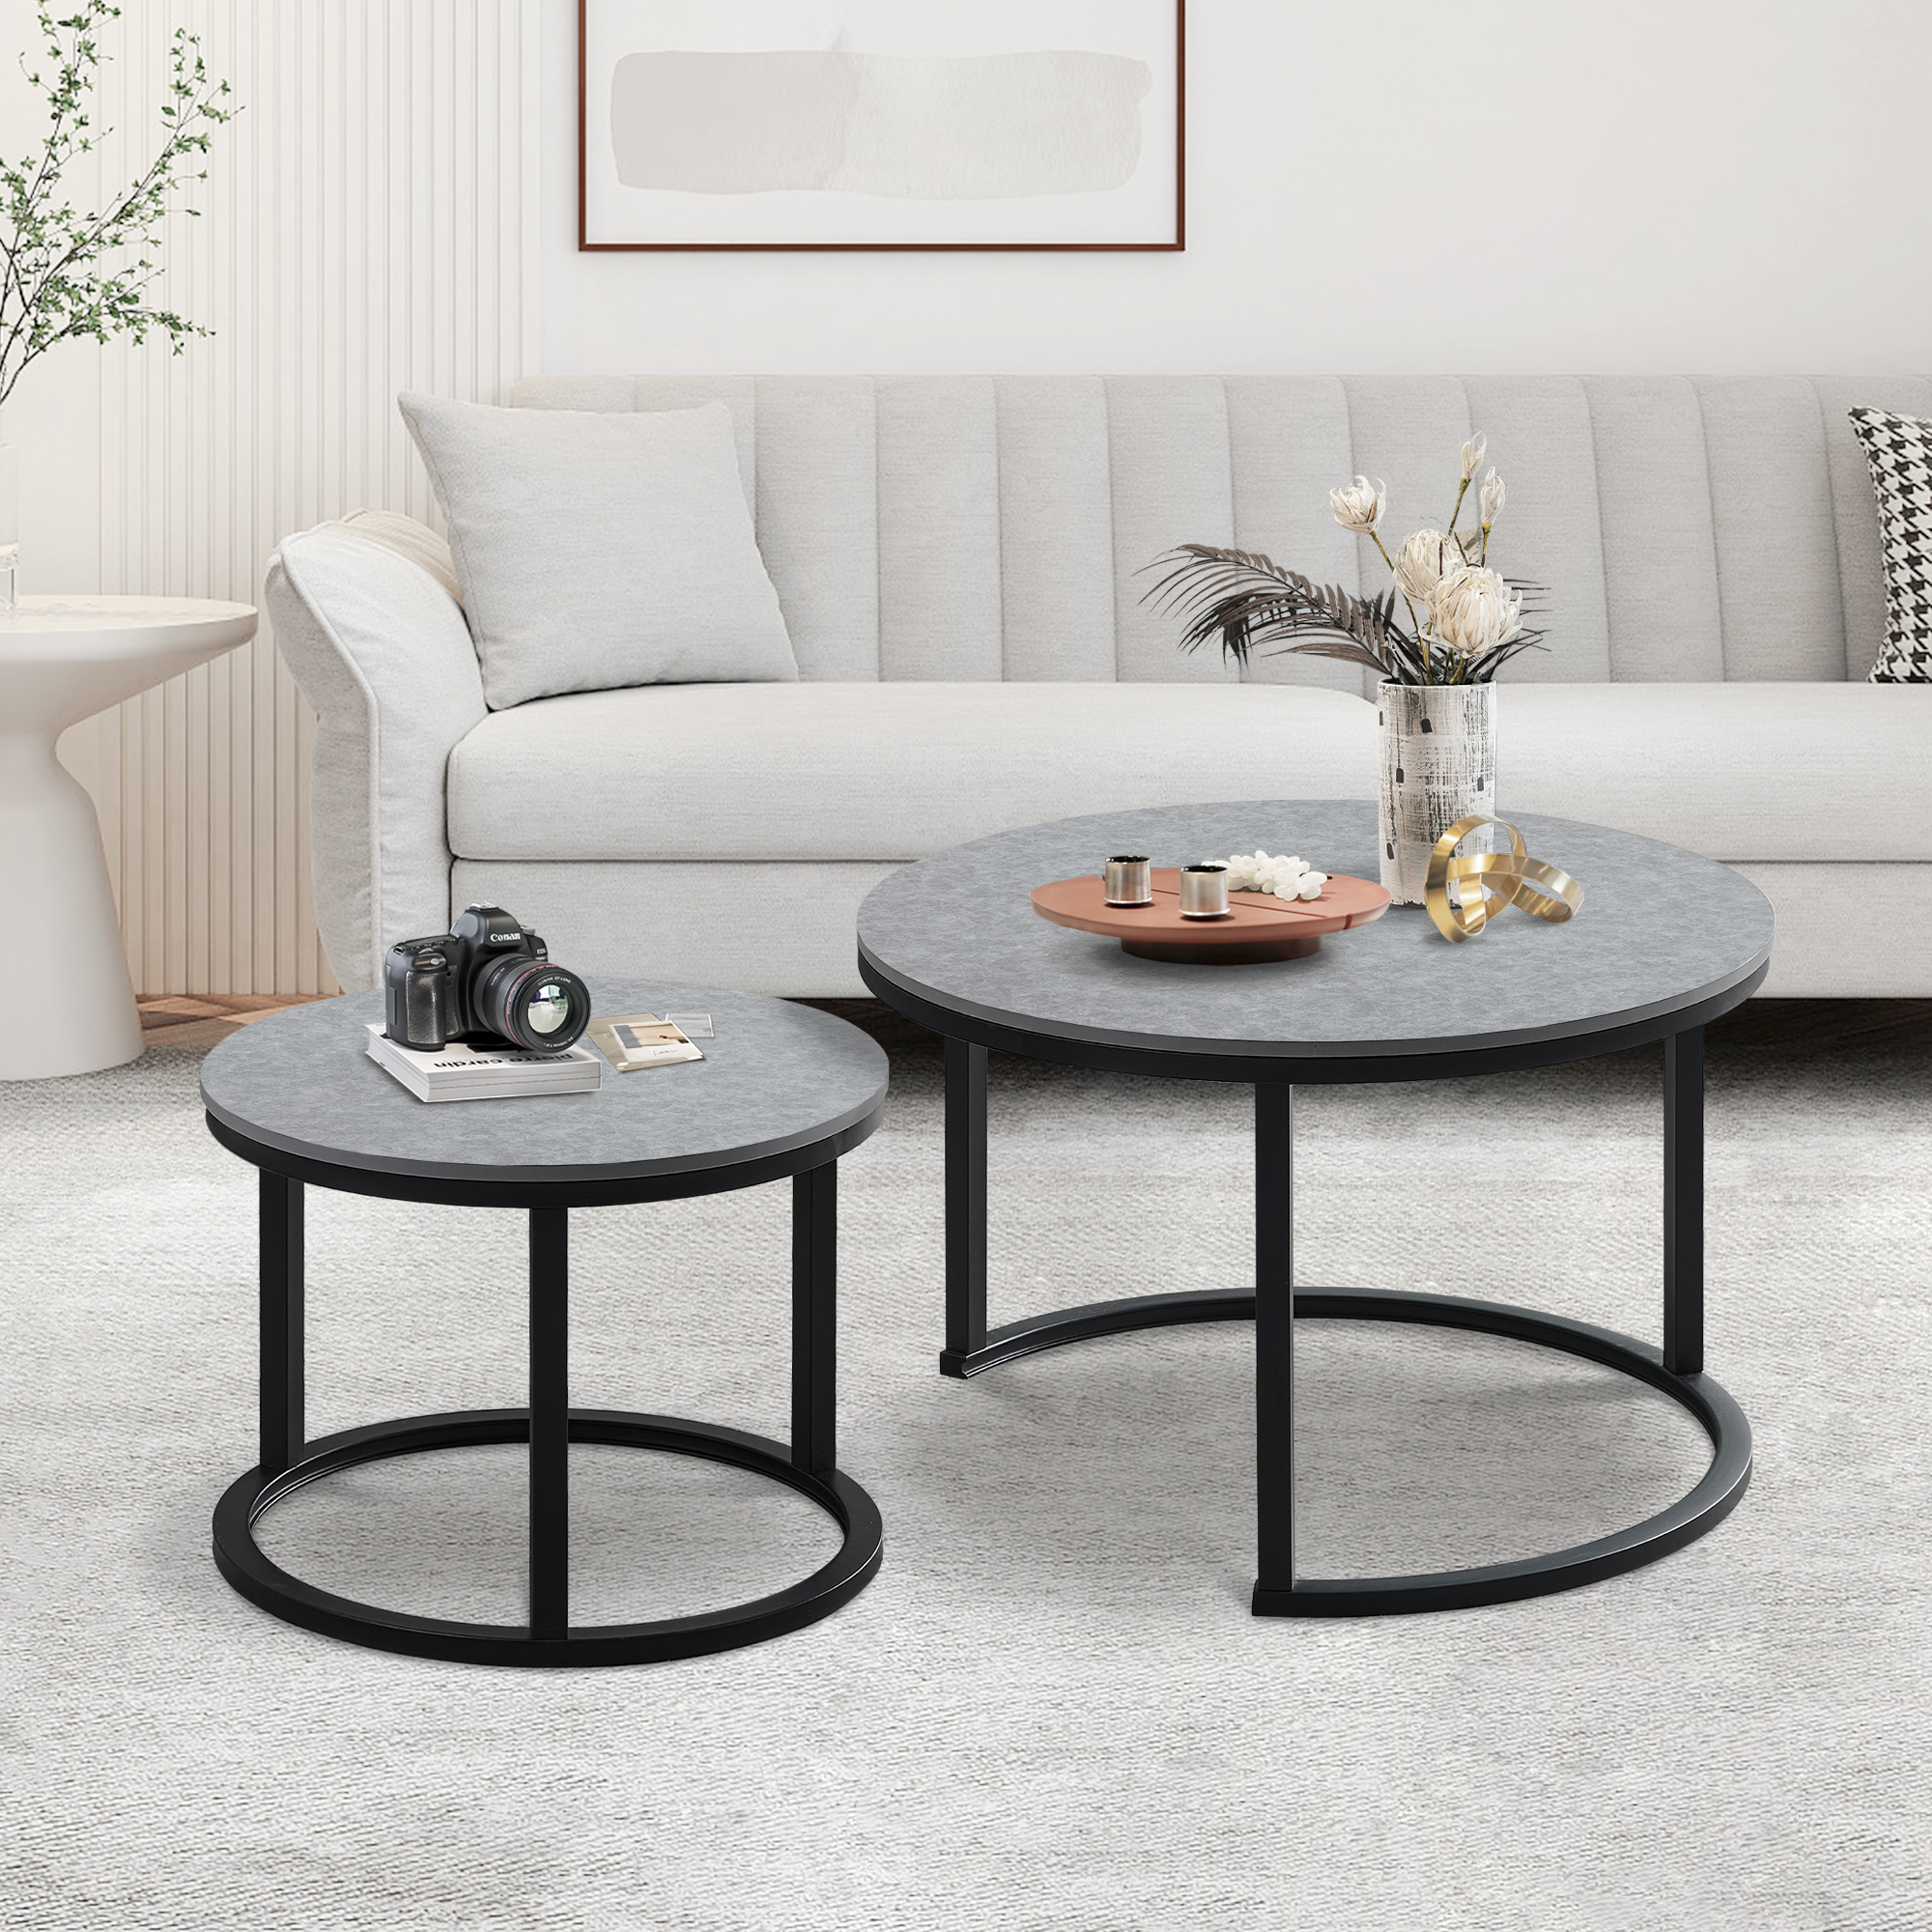 Nathan James Stella Round Nesting Coffee Table Set of 2 Glass, Wood ...